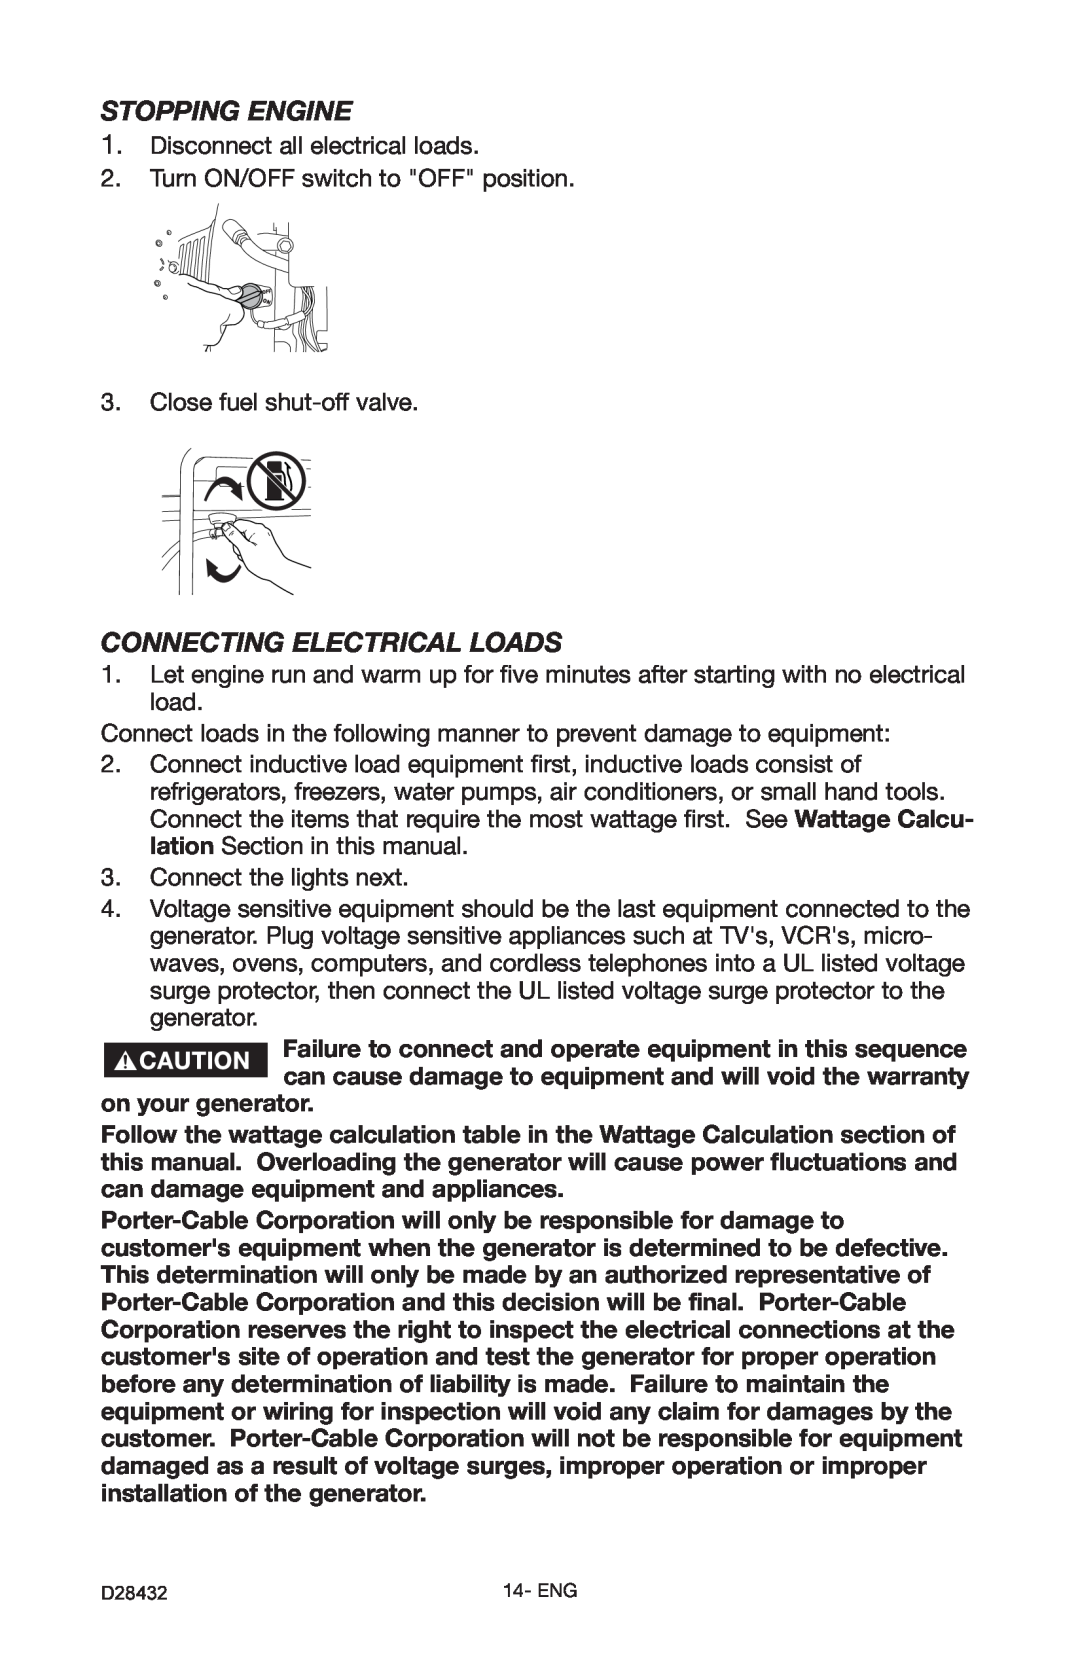 Porter-Cable CH350IS instruction manual Stopping Engine, Connecting Electrical Loads 